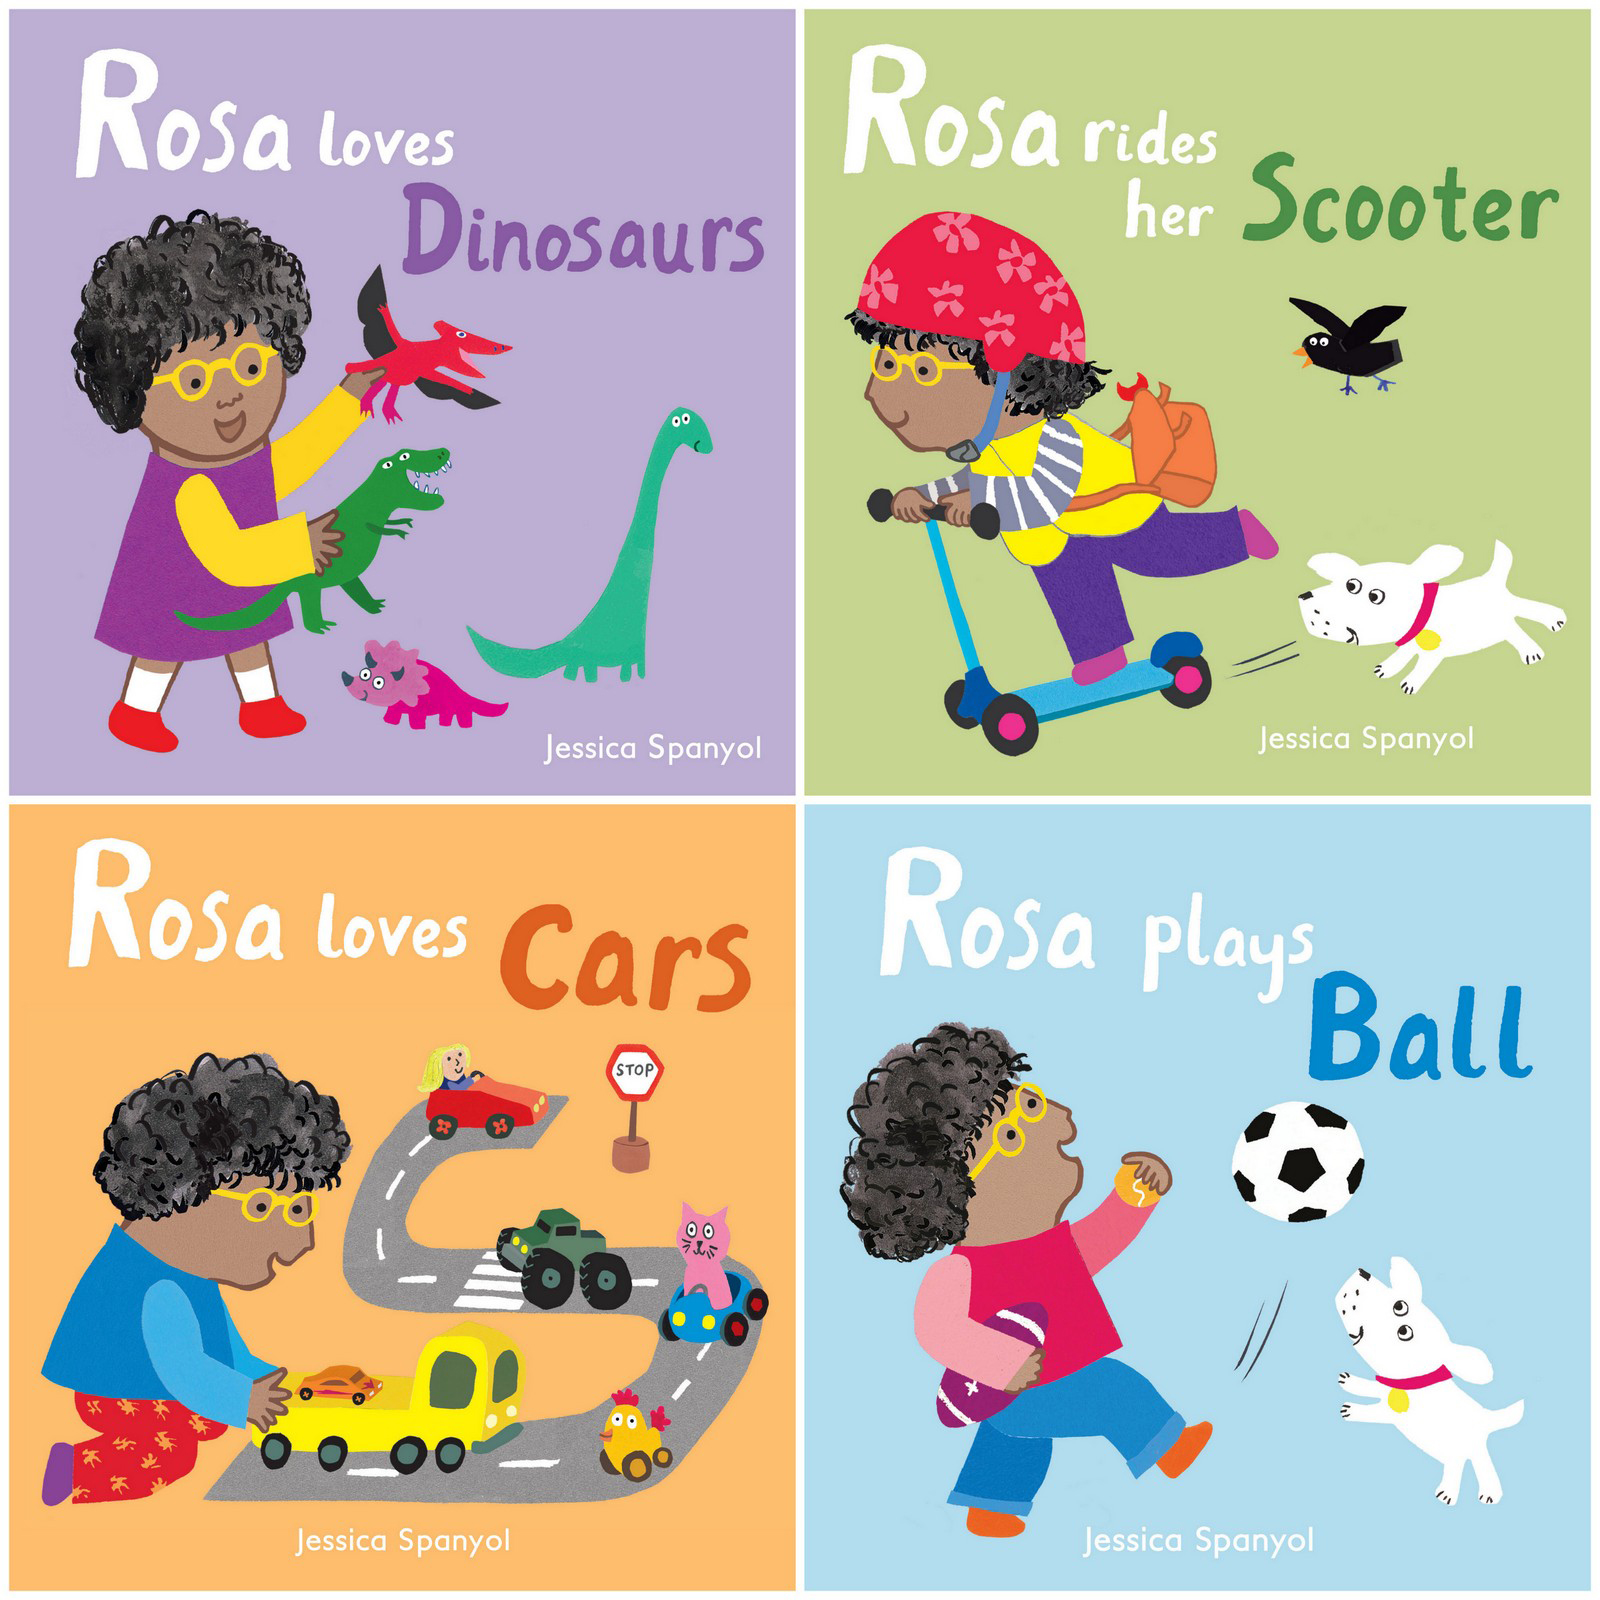 Child's Play Books All About Rosa Bilingual Board Books, Set of 4